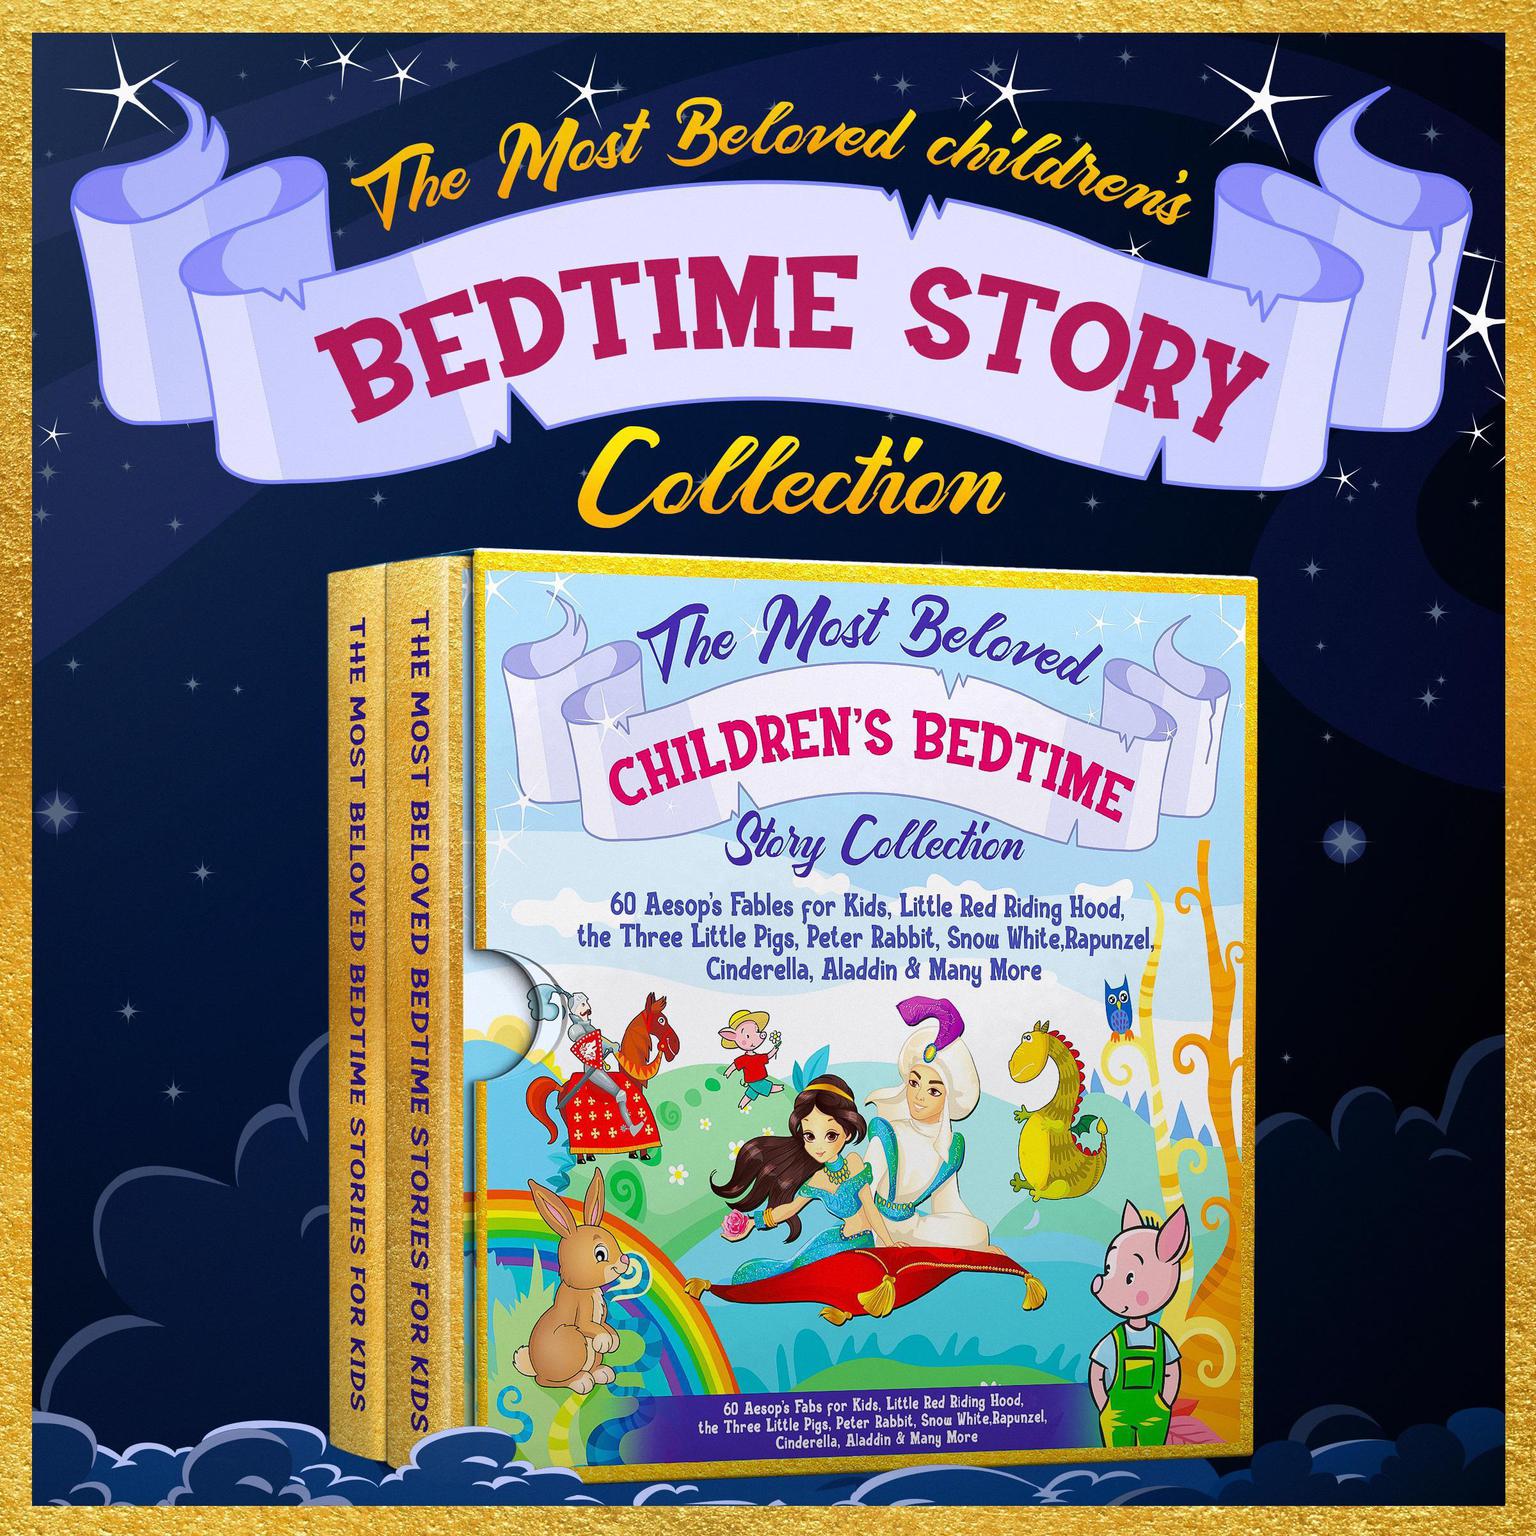 The Most Beloved Childrens Bedtime Story Collection: 60 Aesops Fables for Kids, Little Red Riding Hood, the Three Little Pigs, Peter Rabbit, Snow White, Rapunzel, Cinderella, Aladdin & Many More Audiobook, by Hans Christian Andersen